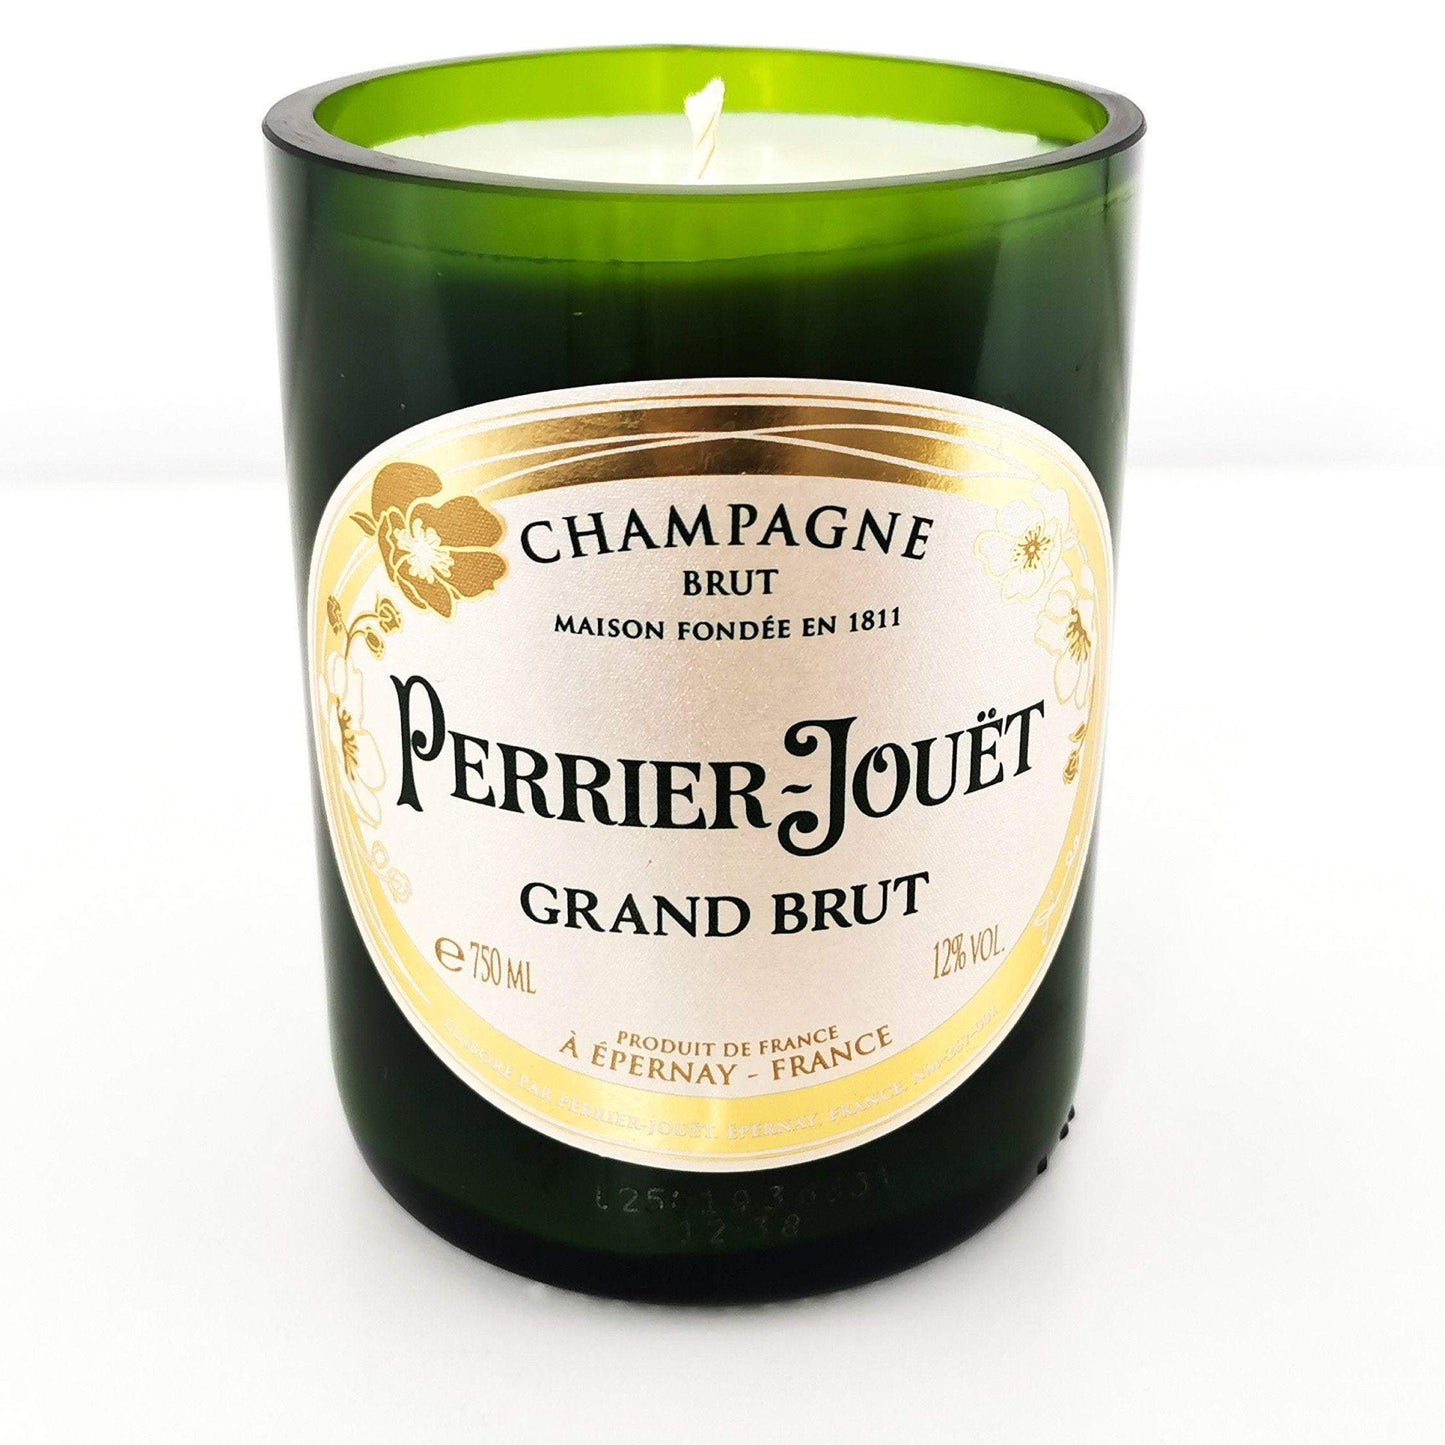 Perrier-Jouët Champagne Bottle Candle Wine & Prosecco Bottle Candles Adhock Homeware